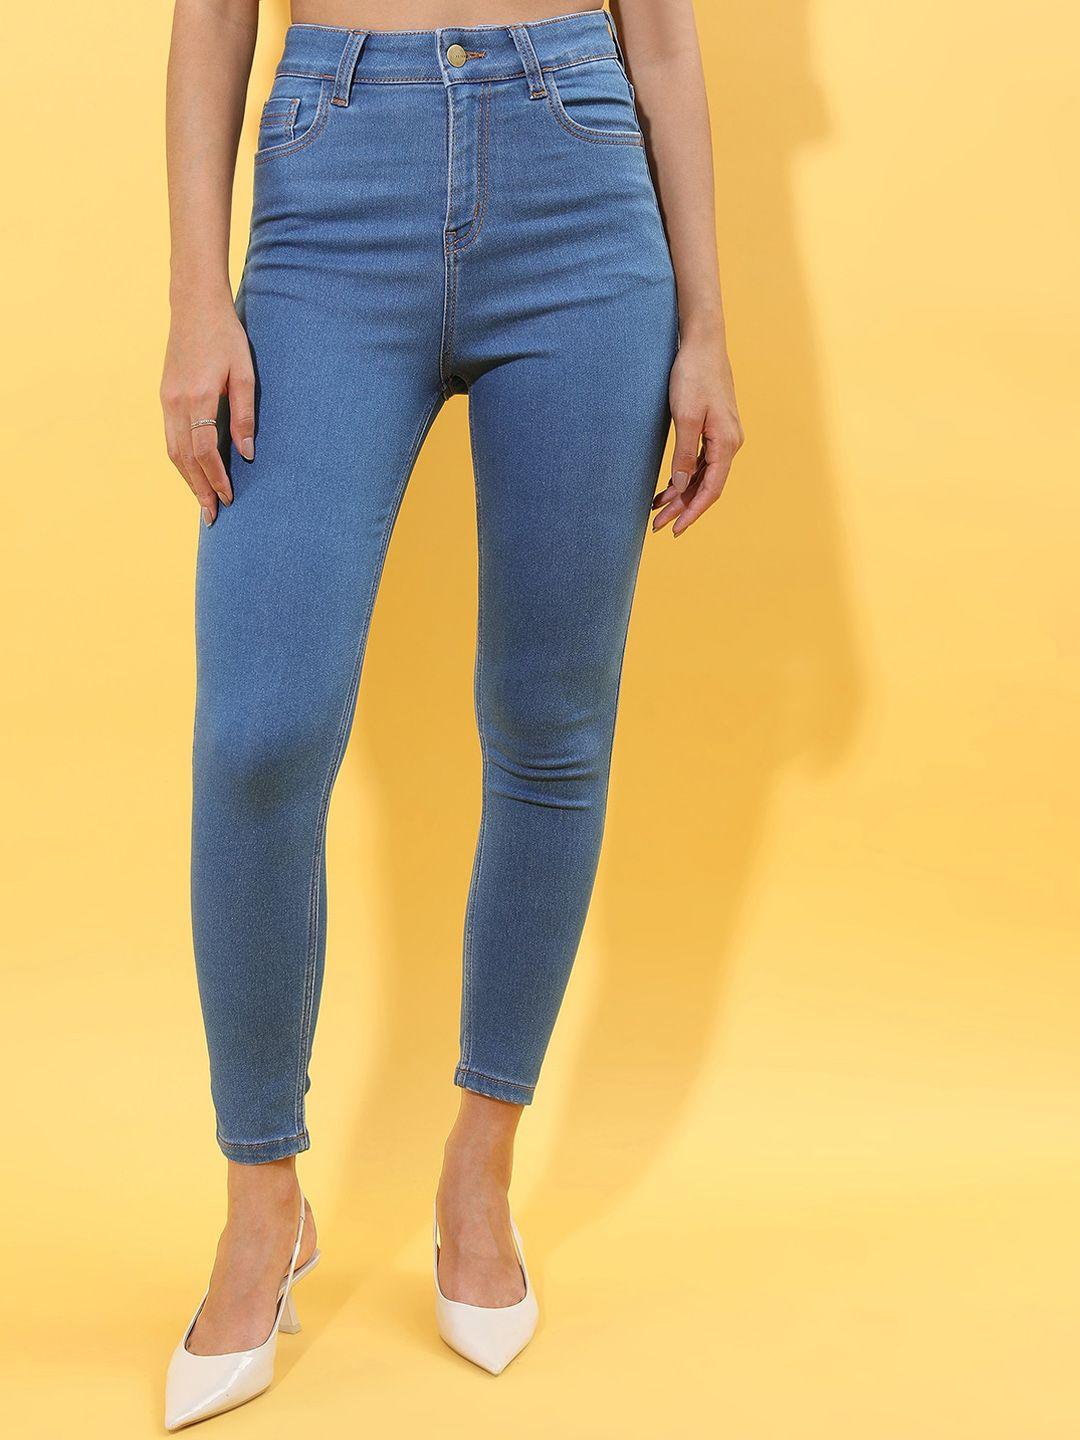 ketch-women-skinny-fit-high-rise-jeans